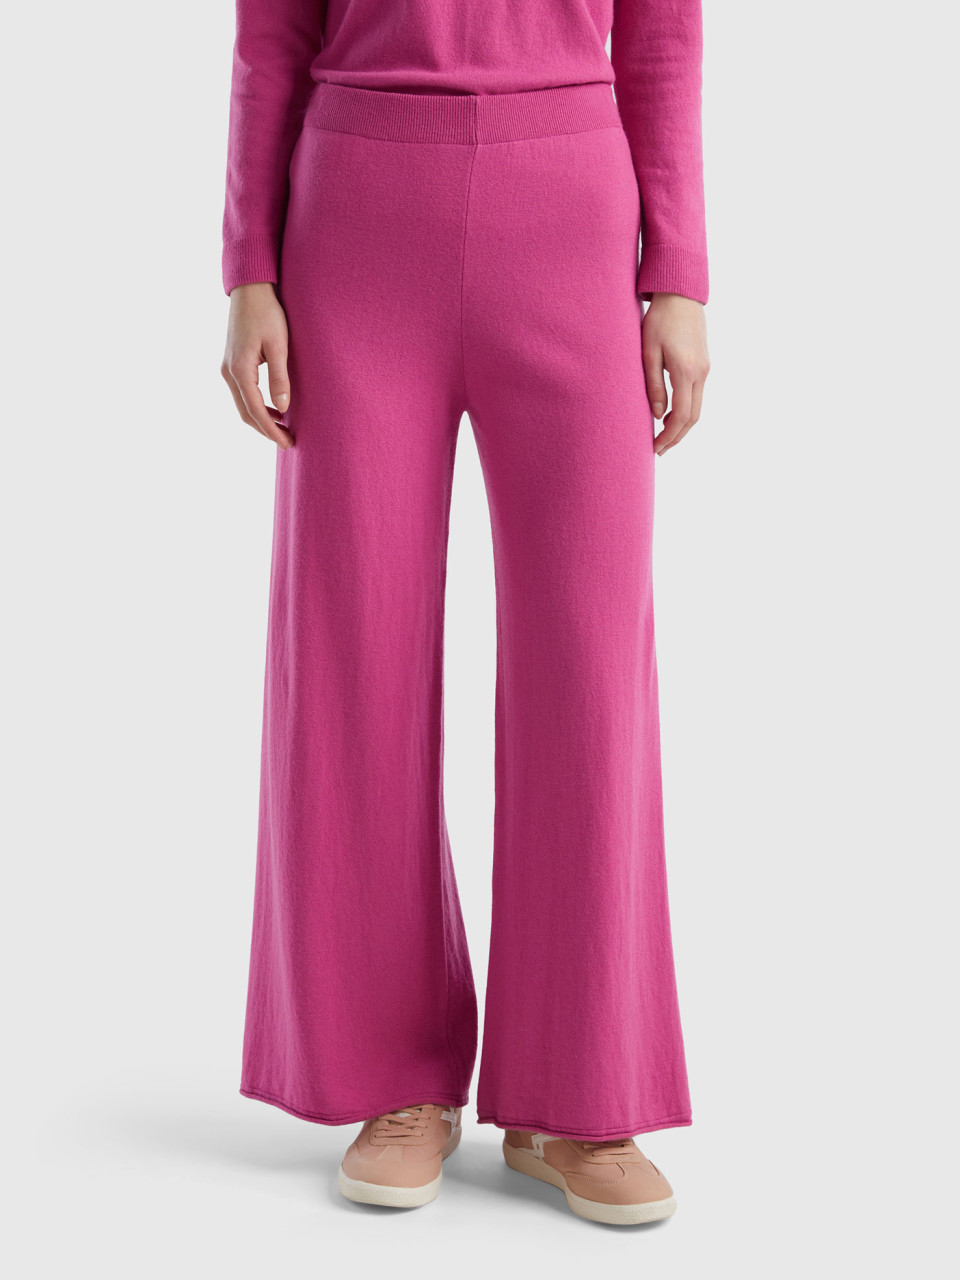 Benetton, Pink Wide Trousers In Cashmere And Wool Blend, Pink, Women